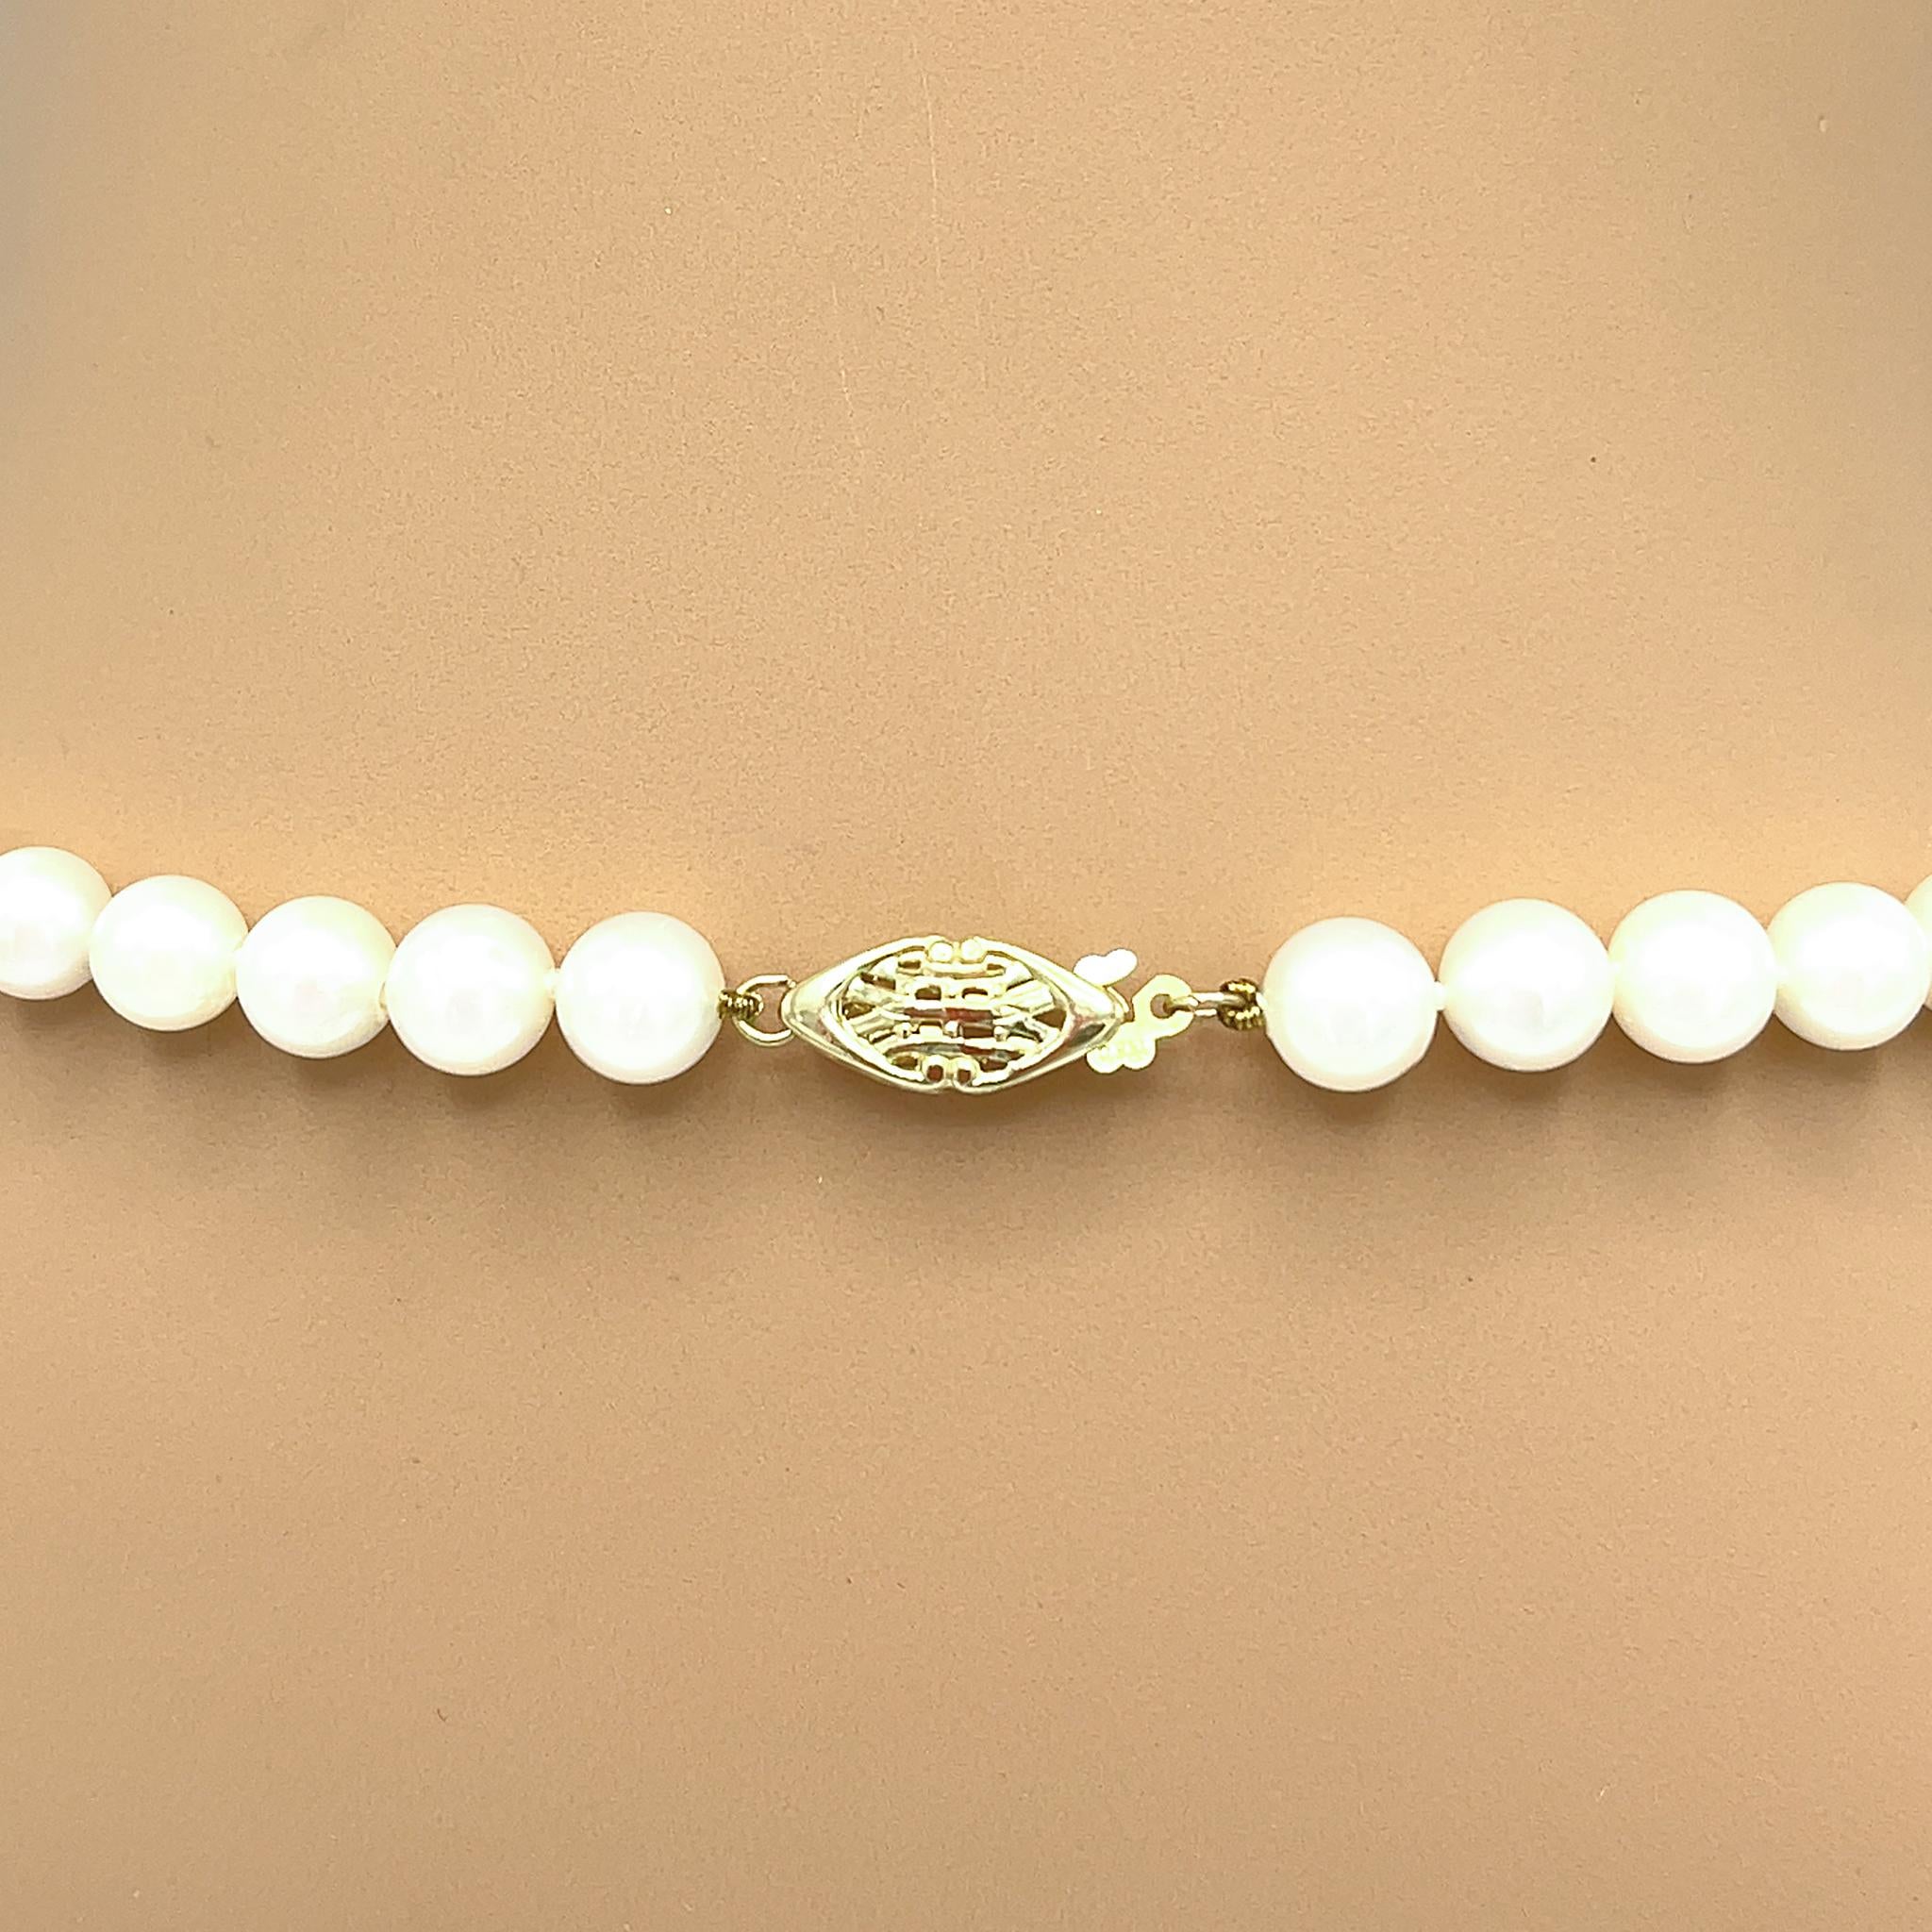 14 kt Yellow Gold
Pearls: 6.5mm to 6.75 mm
Length: 32 inches
Very Nice Luster